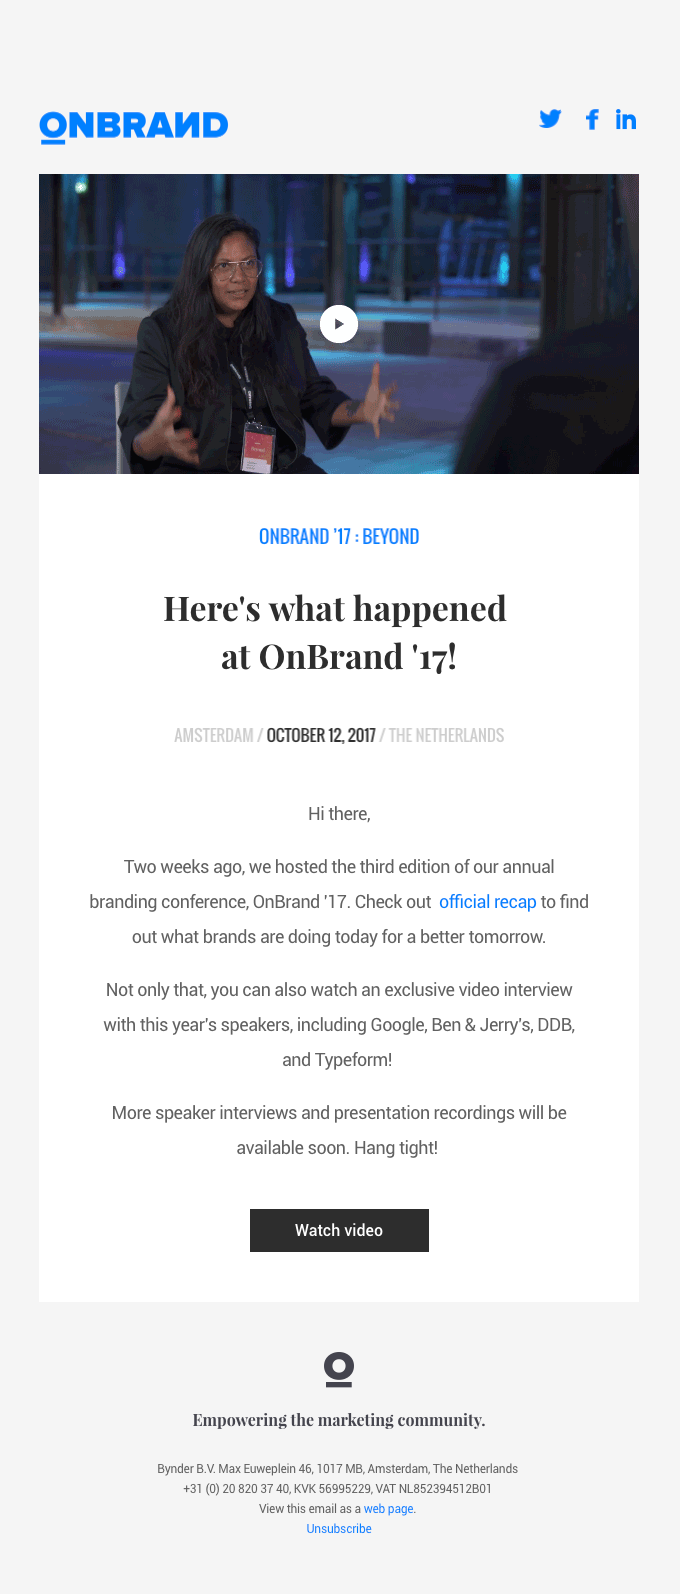 OnBrand ’17 recap + an exclusive video interview with speakers